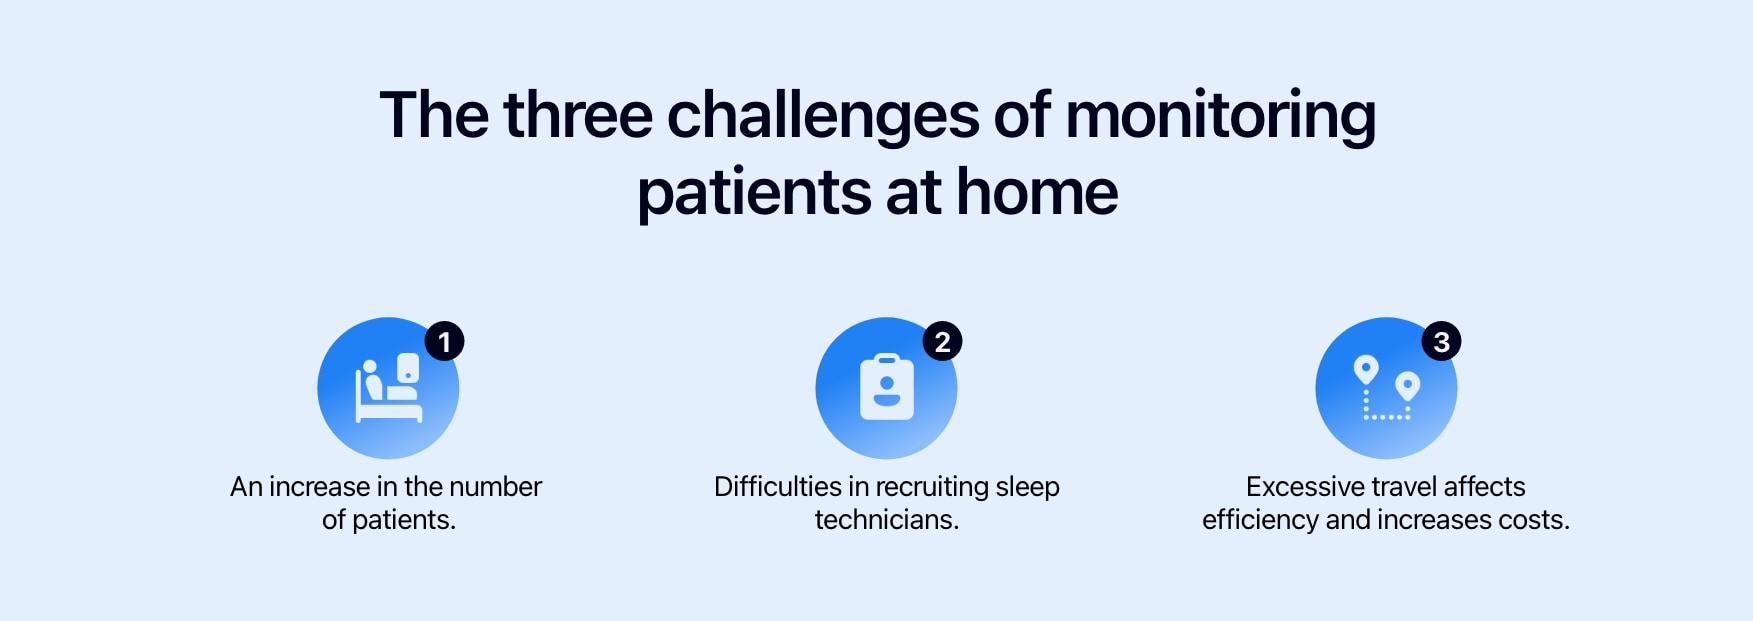 Diagram showing the three challenges of monitoring patients at home.